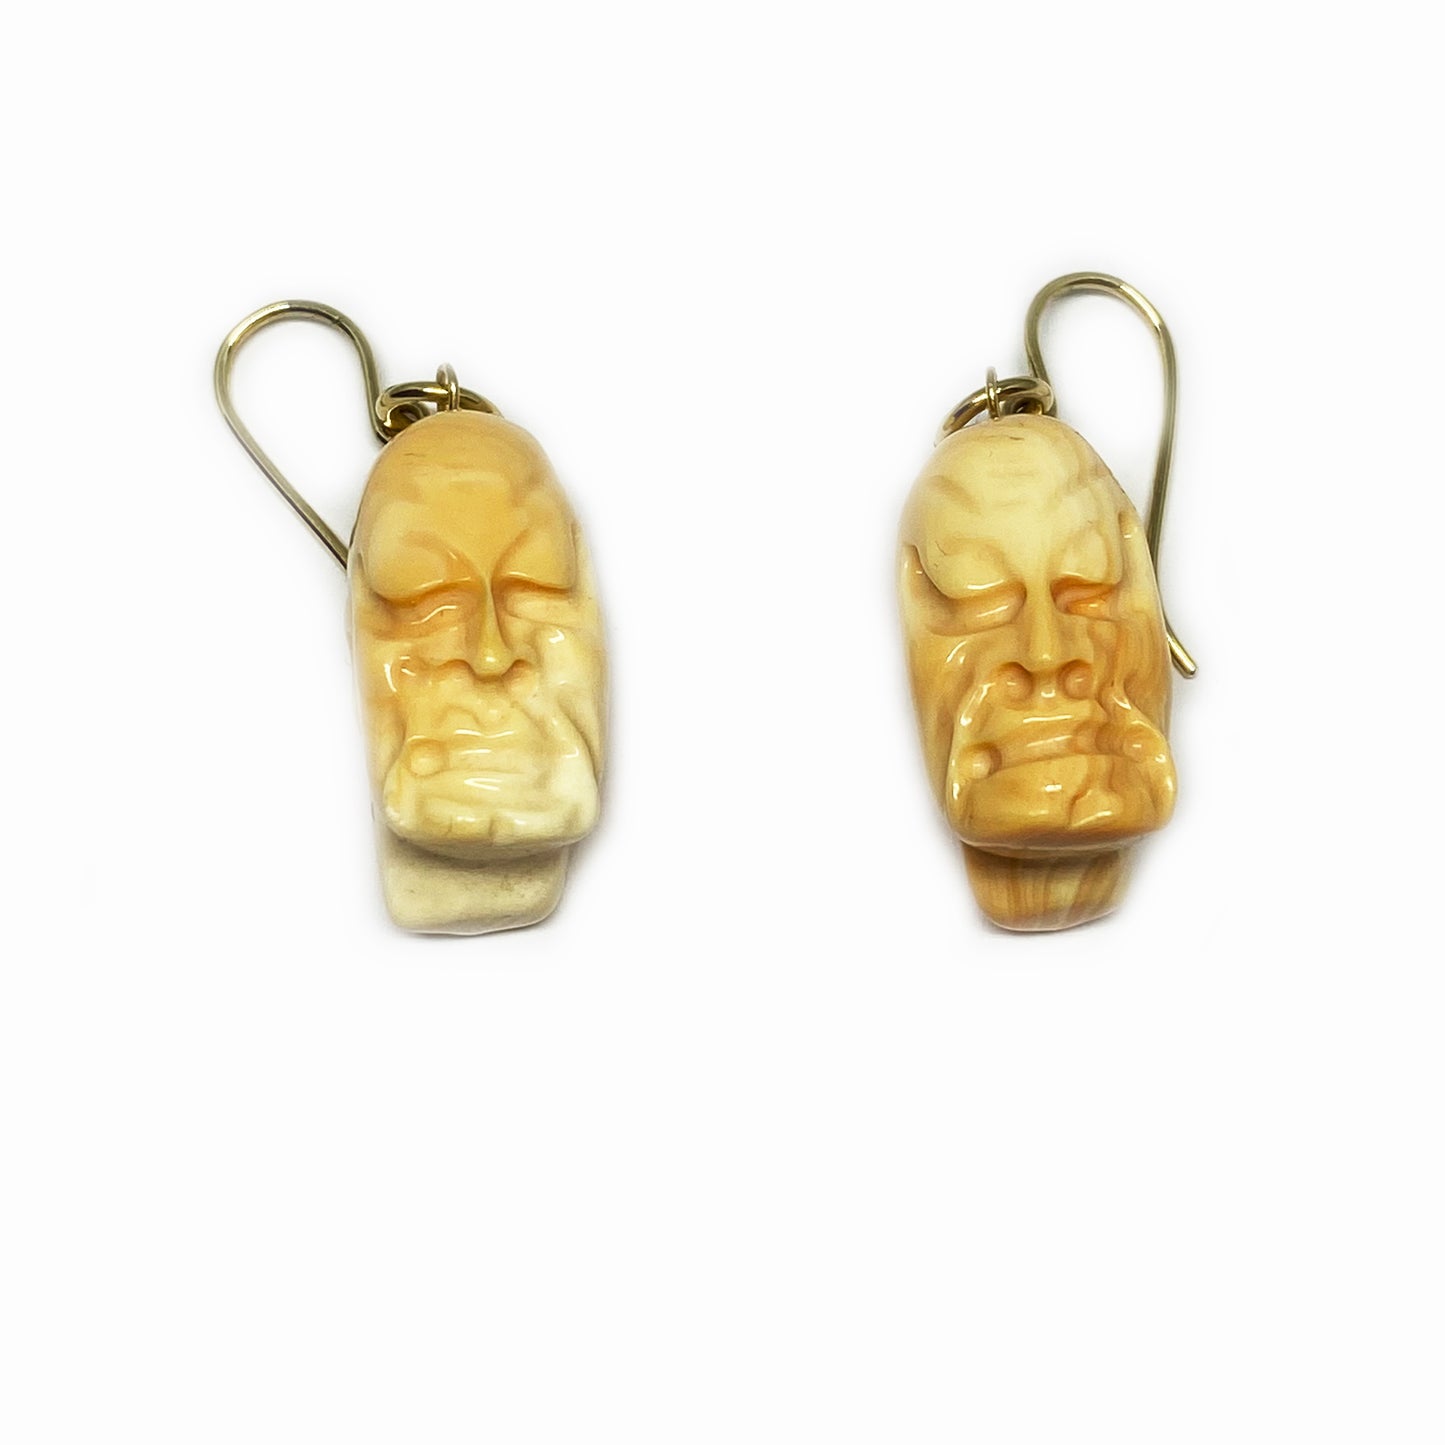 Vintage 9K Gold Natural Coral Earring, Carved Asian Face, Early 20th Century Gods Head, Chinese Carved Coral, 9 ct Drop Earrings, Wise Man